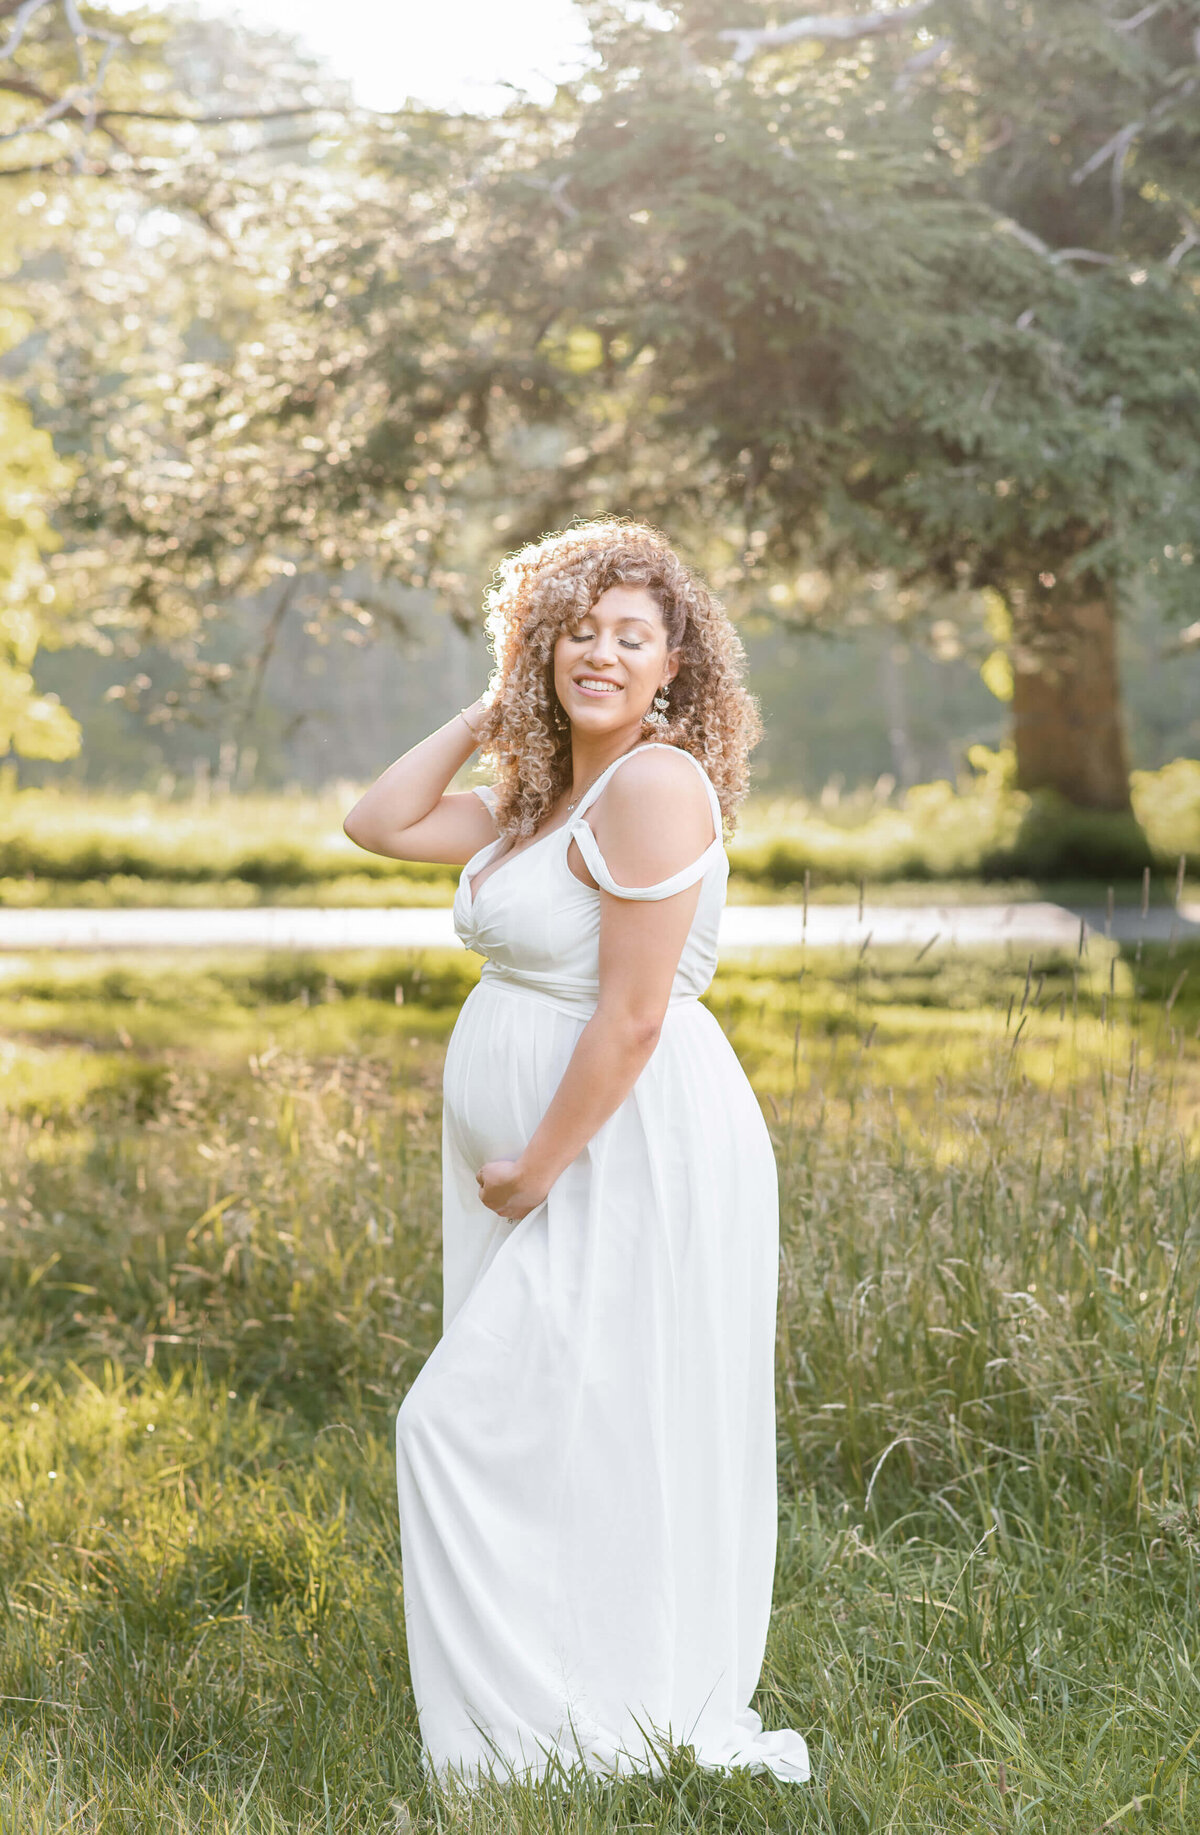 30 weeks pregnant woman on a field smiling enjoying a spring day